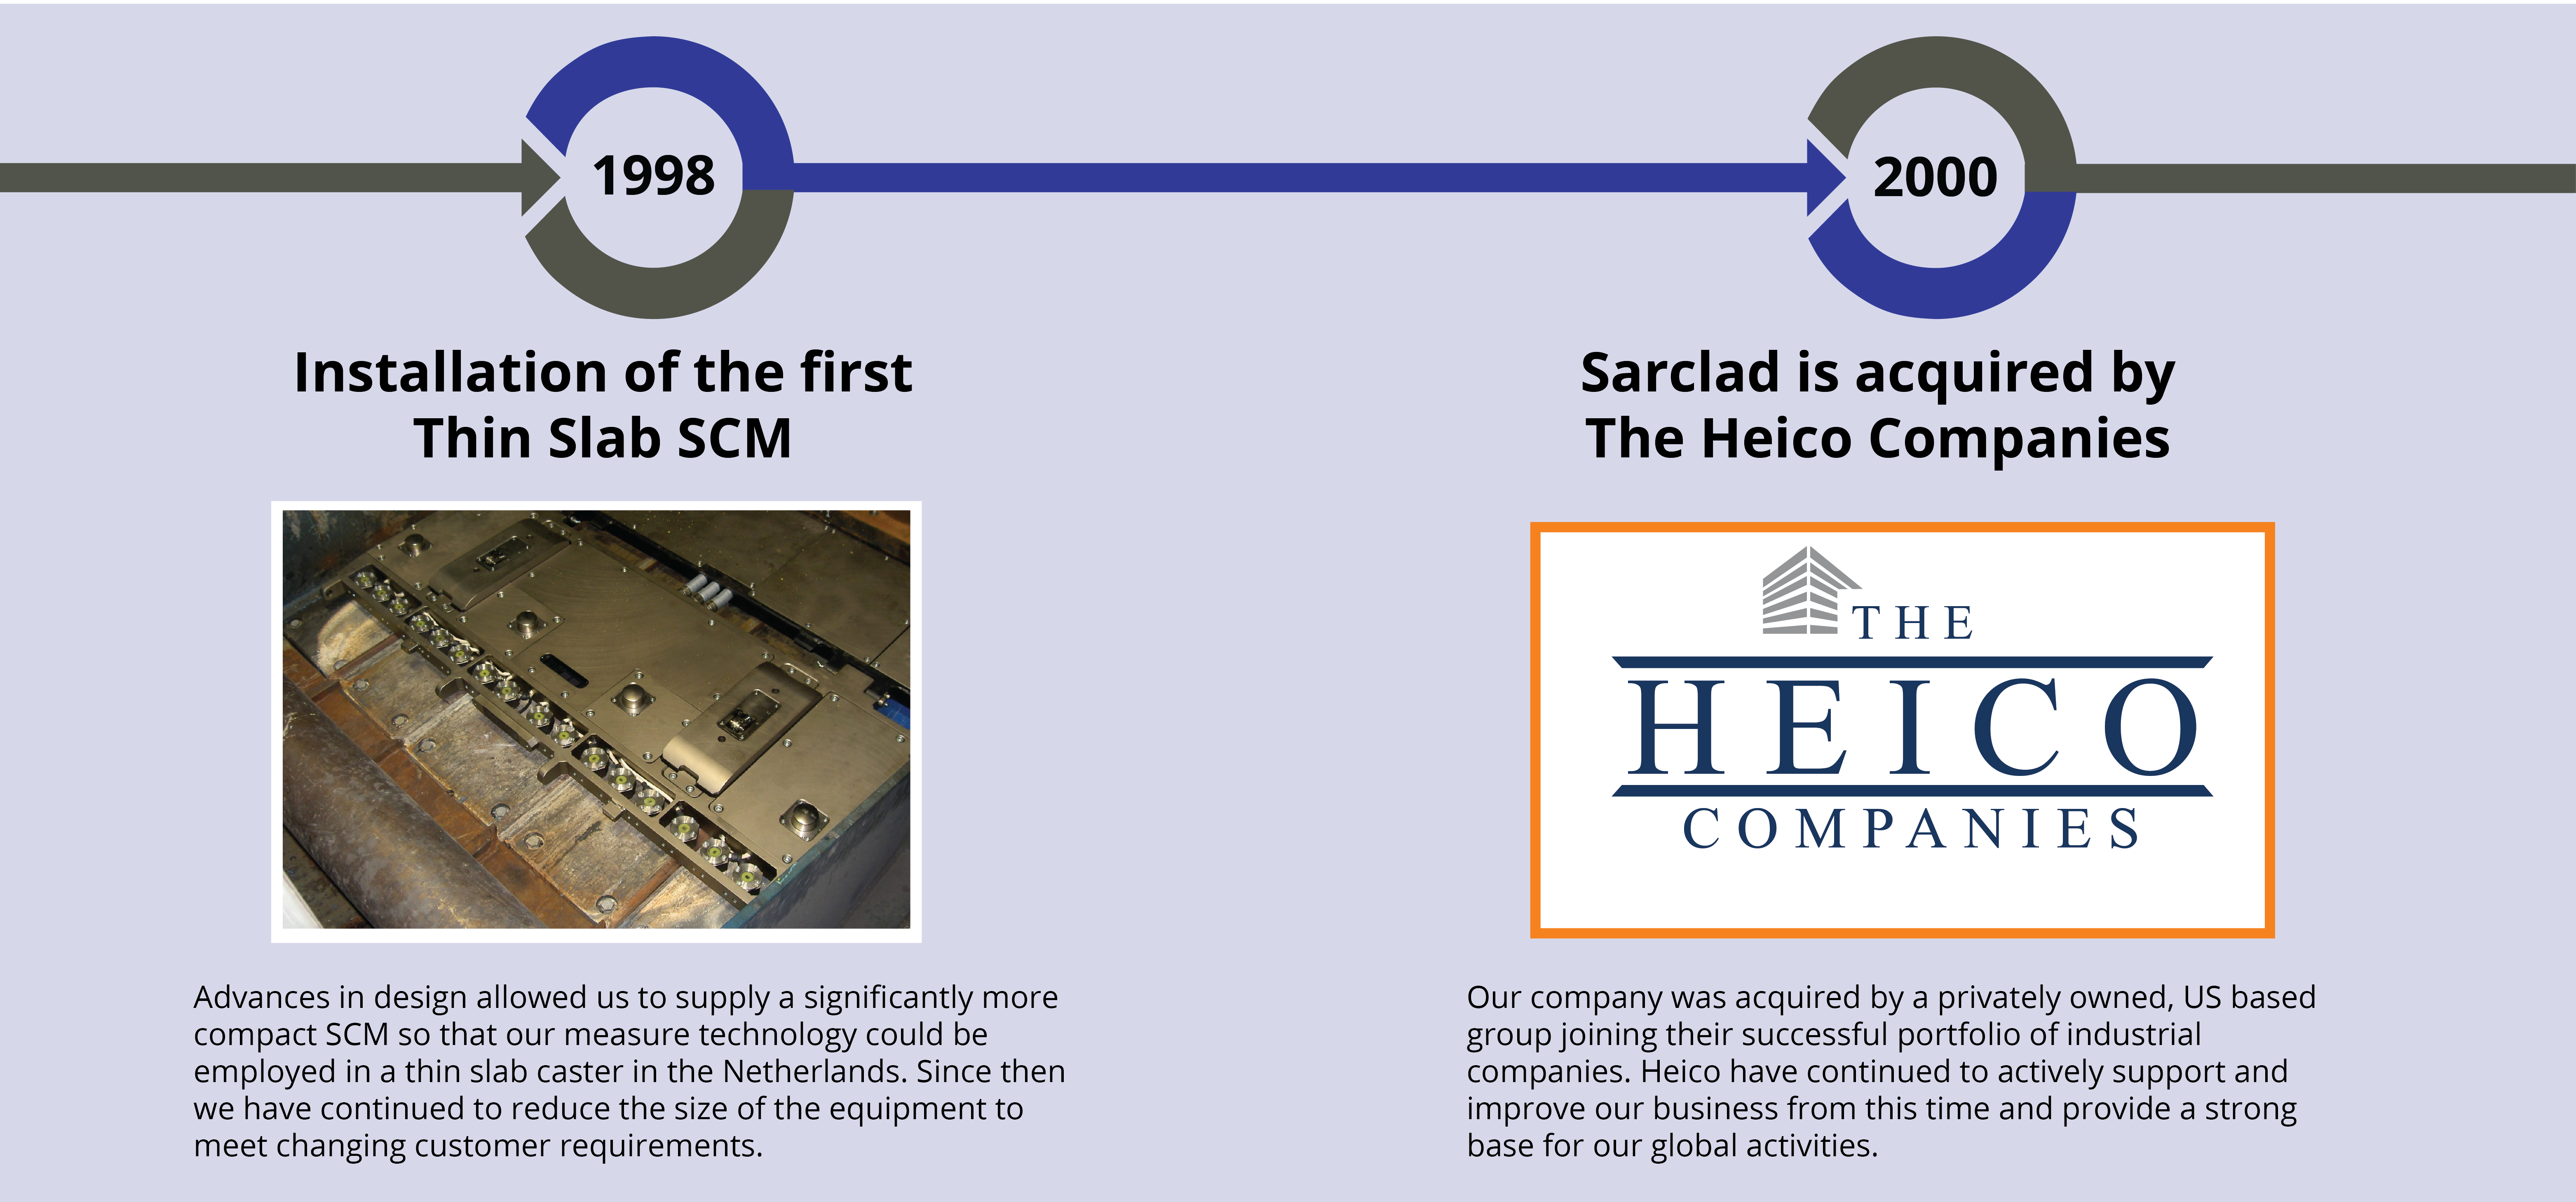 Sarclad was acquired by The Heico Companies in 2000